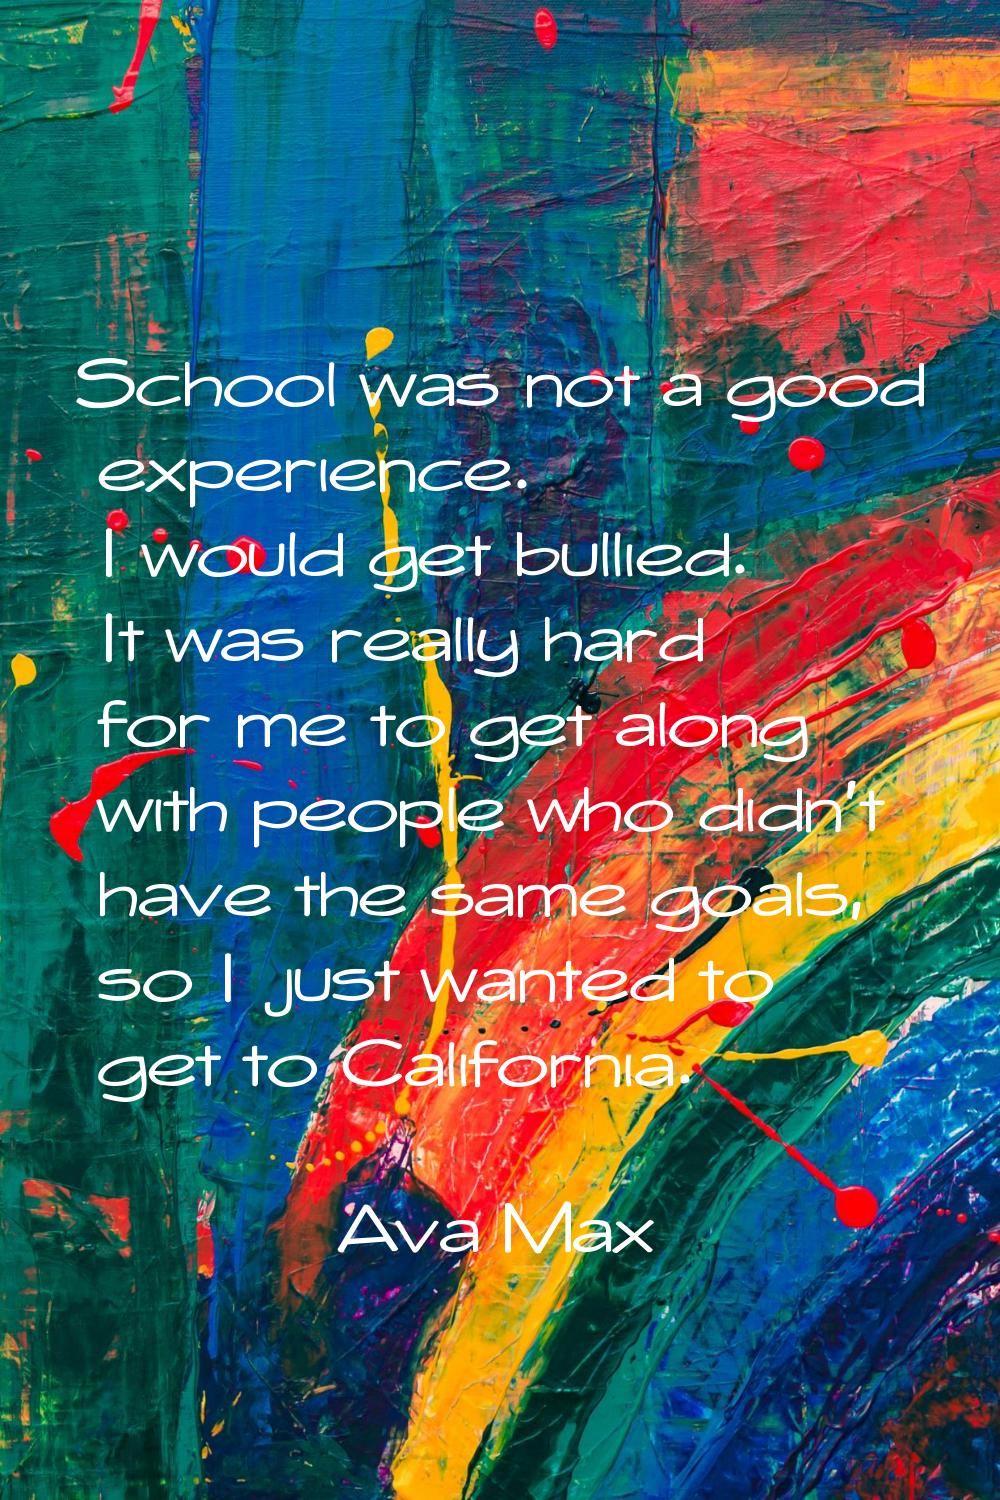 School was not a good experience. I would get bullied. It was really hard for me to get along with 